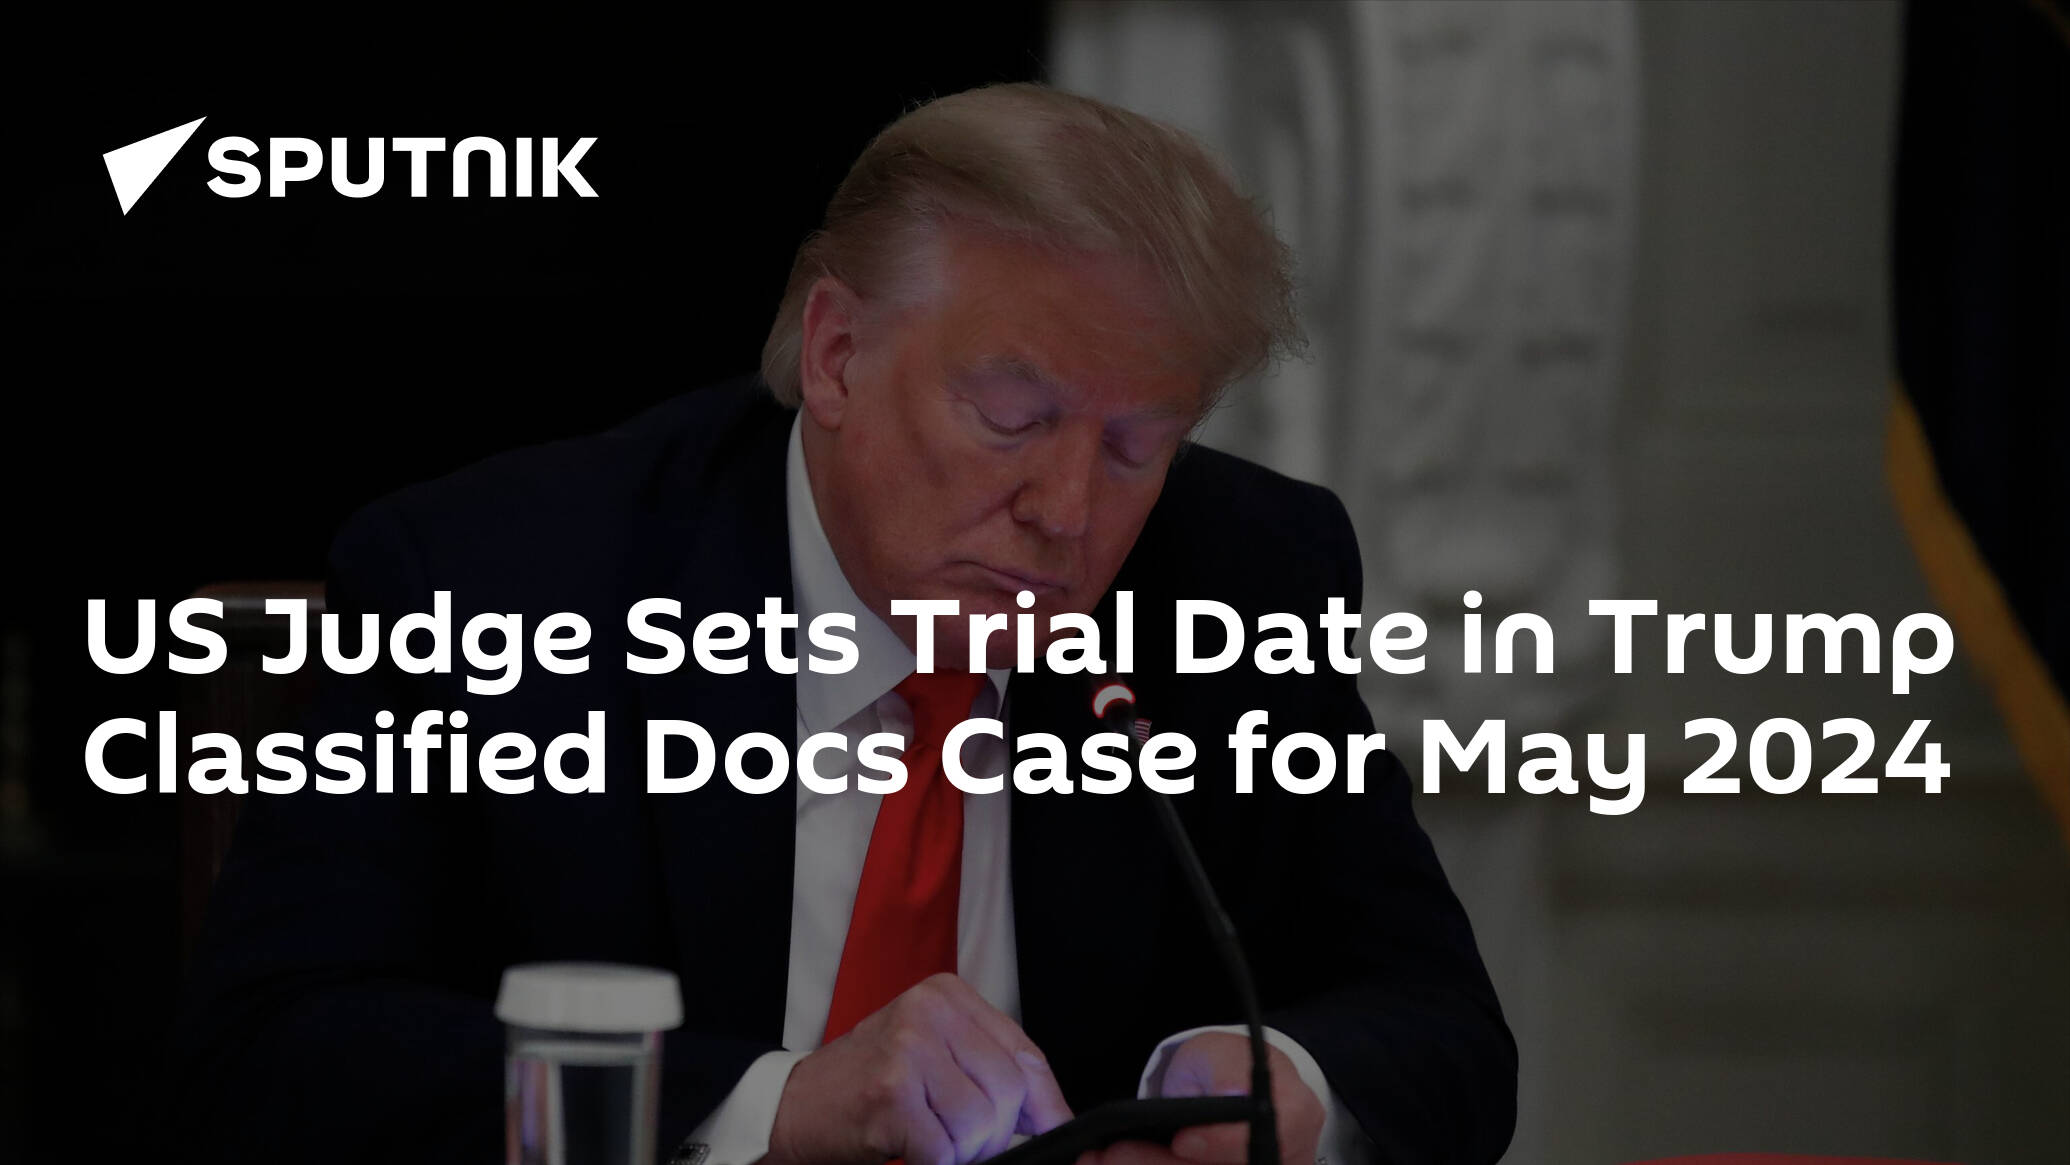 US Judge Sets Trial Date in Trump Classified Docs Case for May 2024